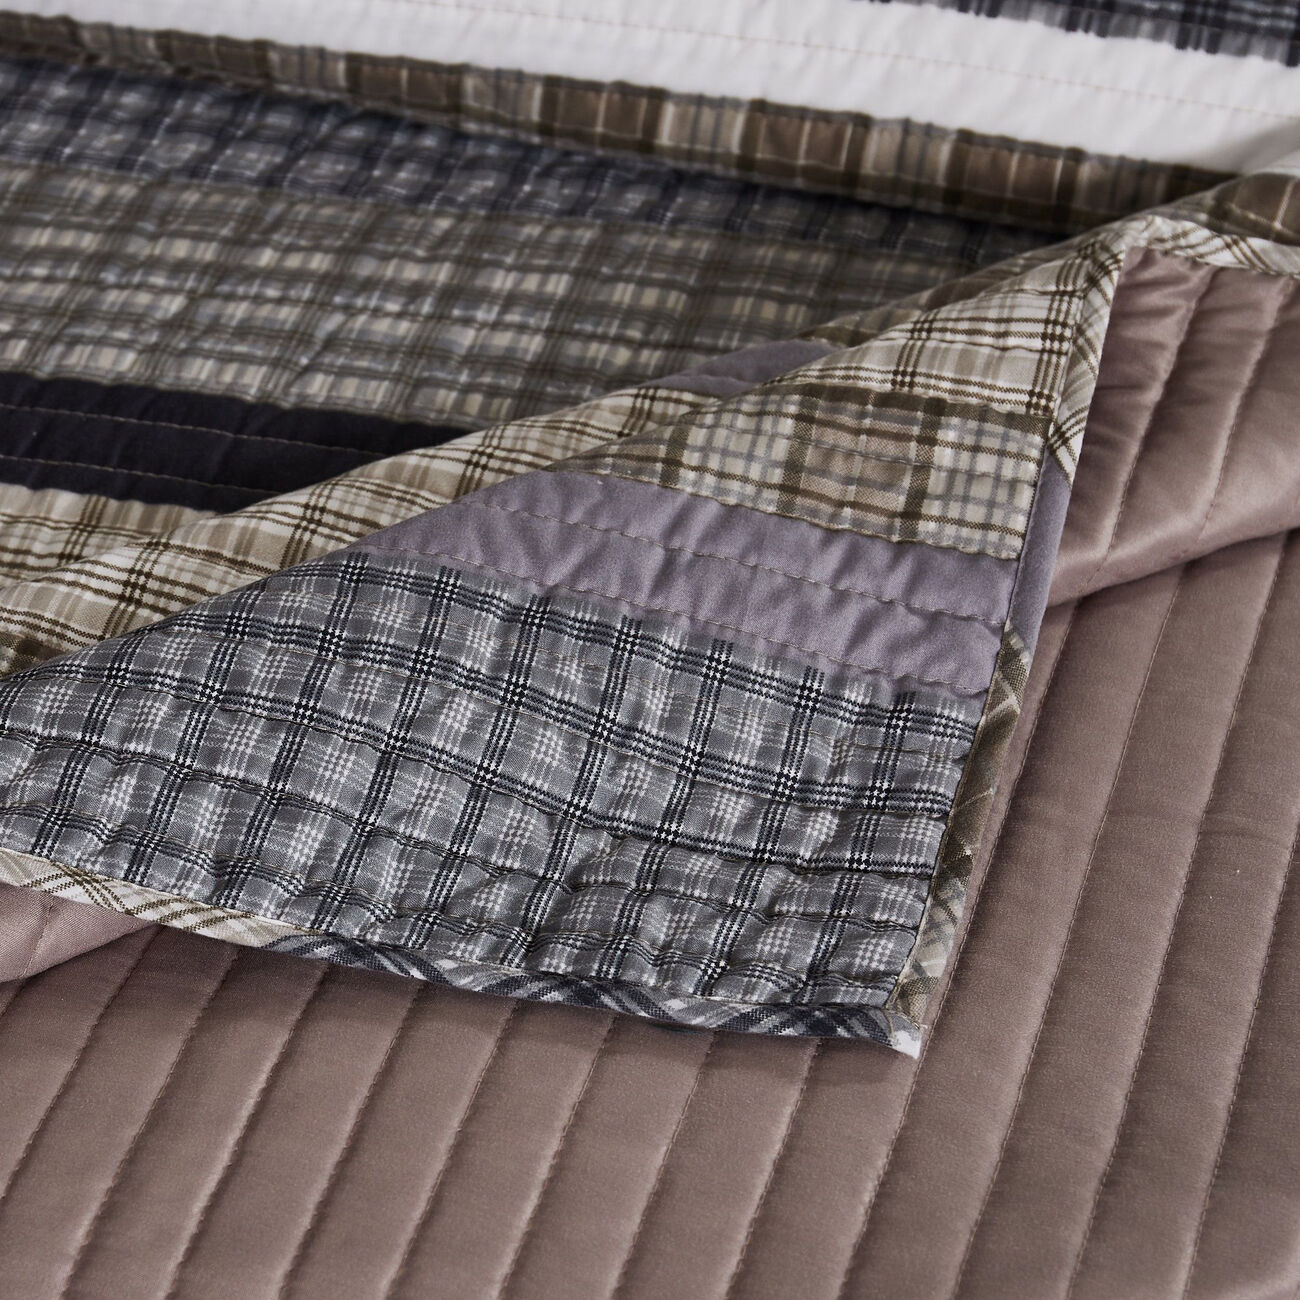 Prague 3 Piece Microfiber Plaids and Striped Pattern Queen Quilt Set, Taupe Gray